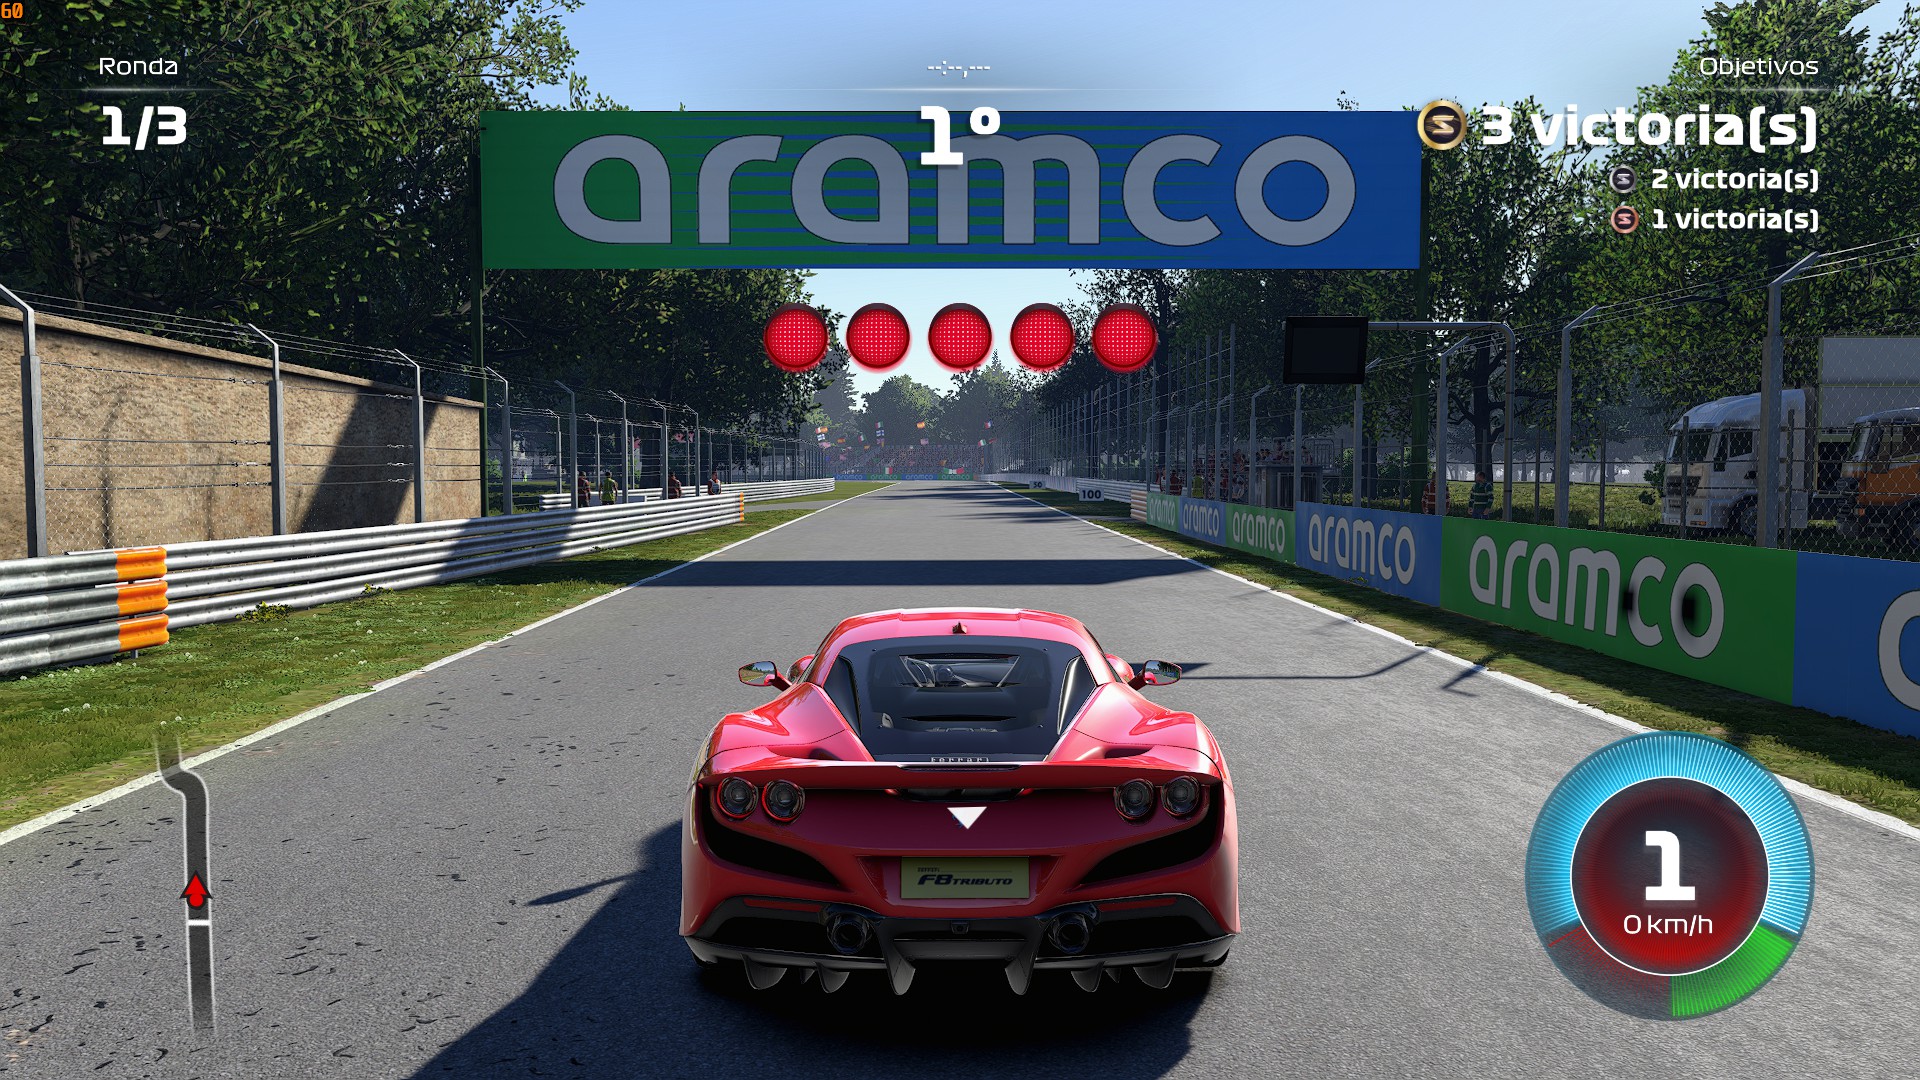 F1 22 Review PC: More Realistic Physics And The Big Surprise Of Supercars